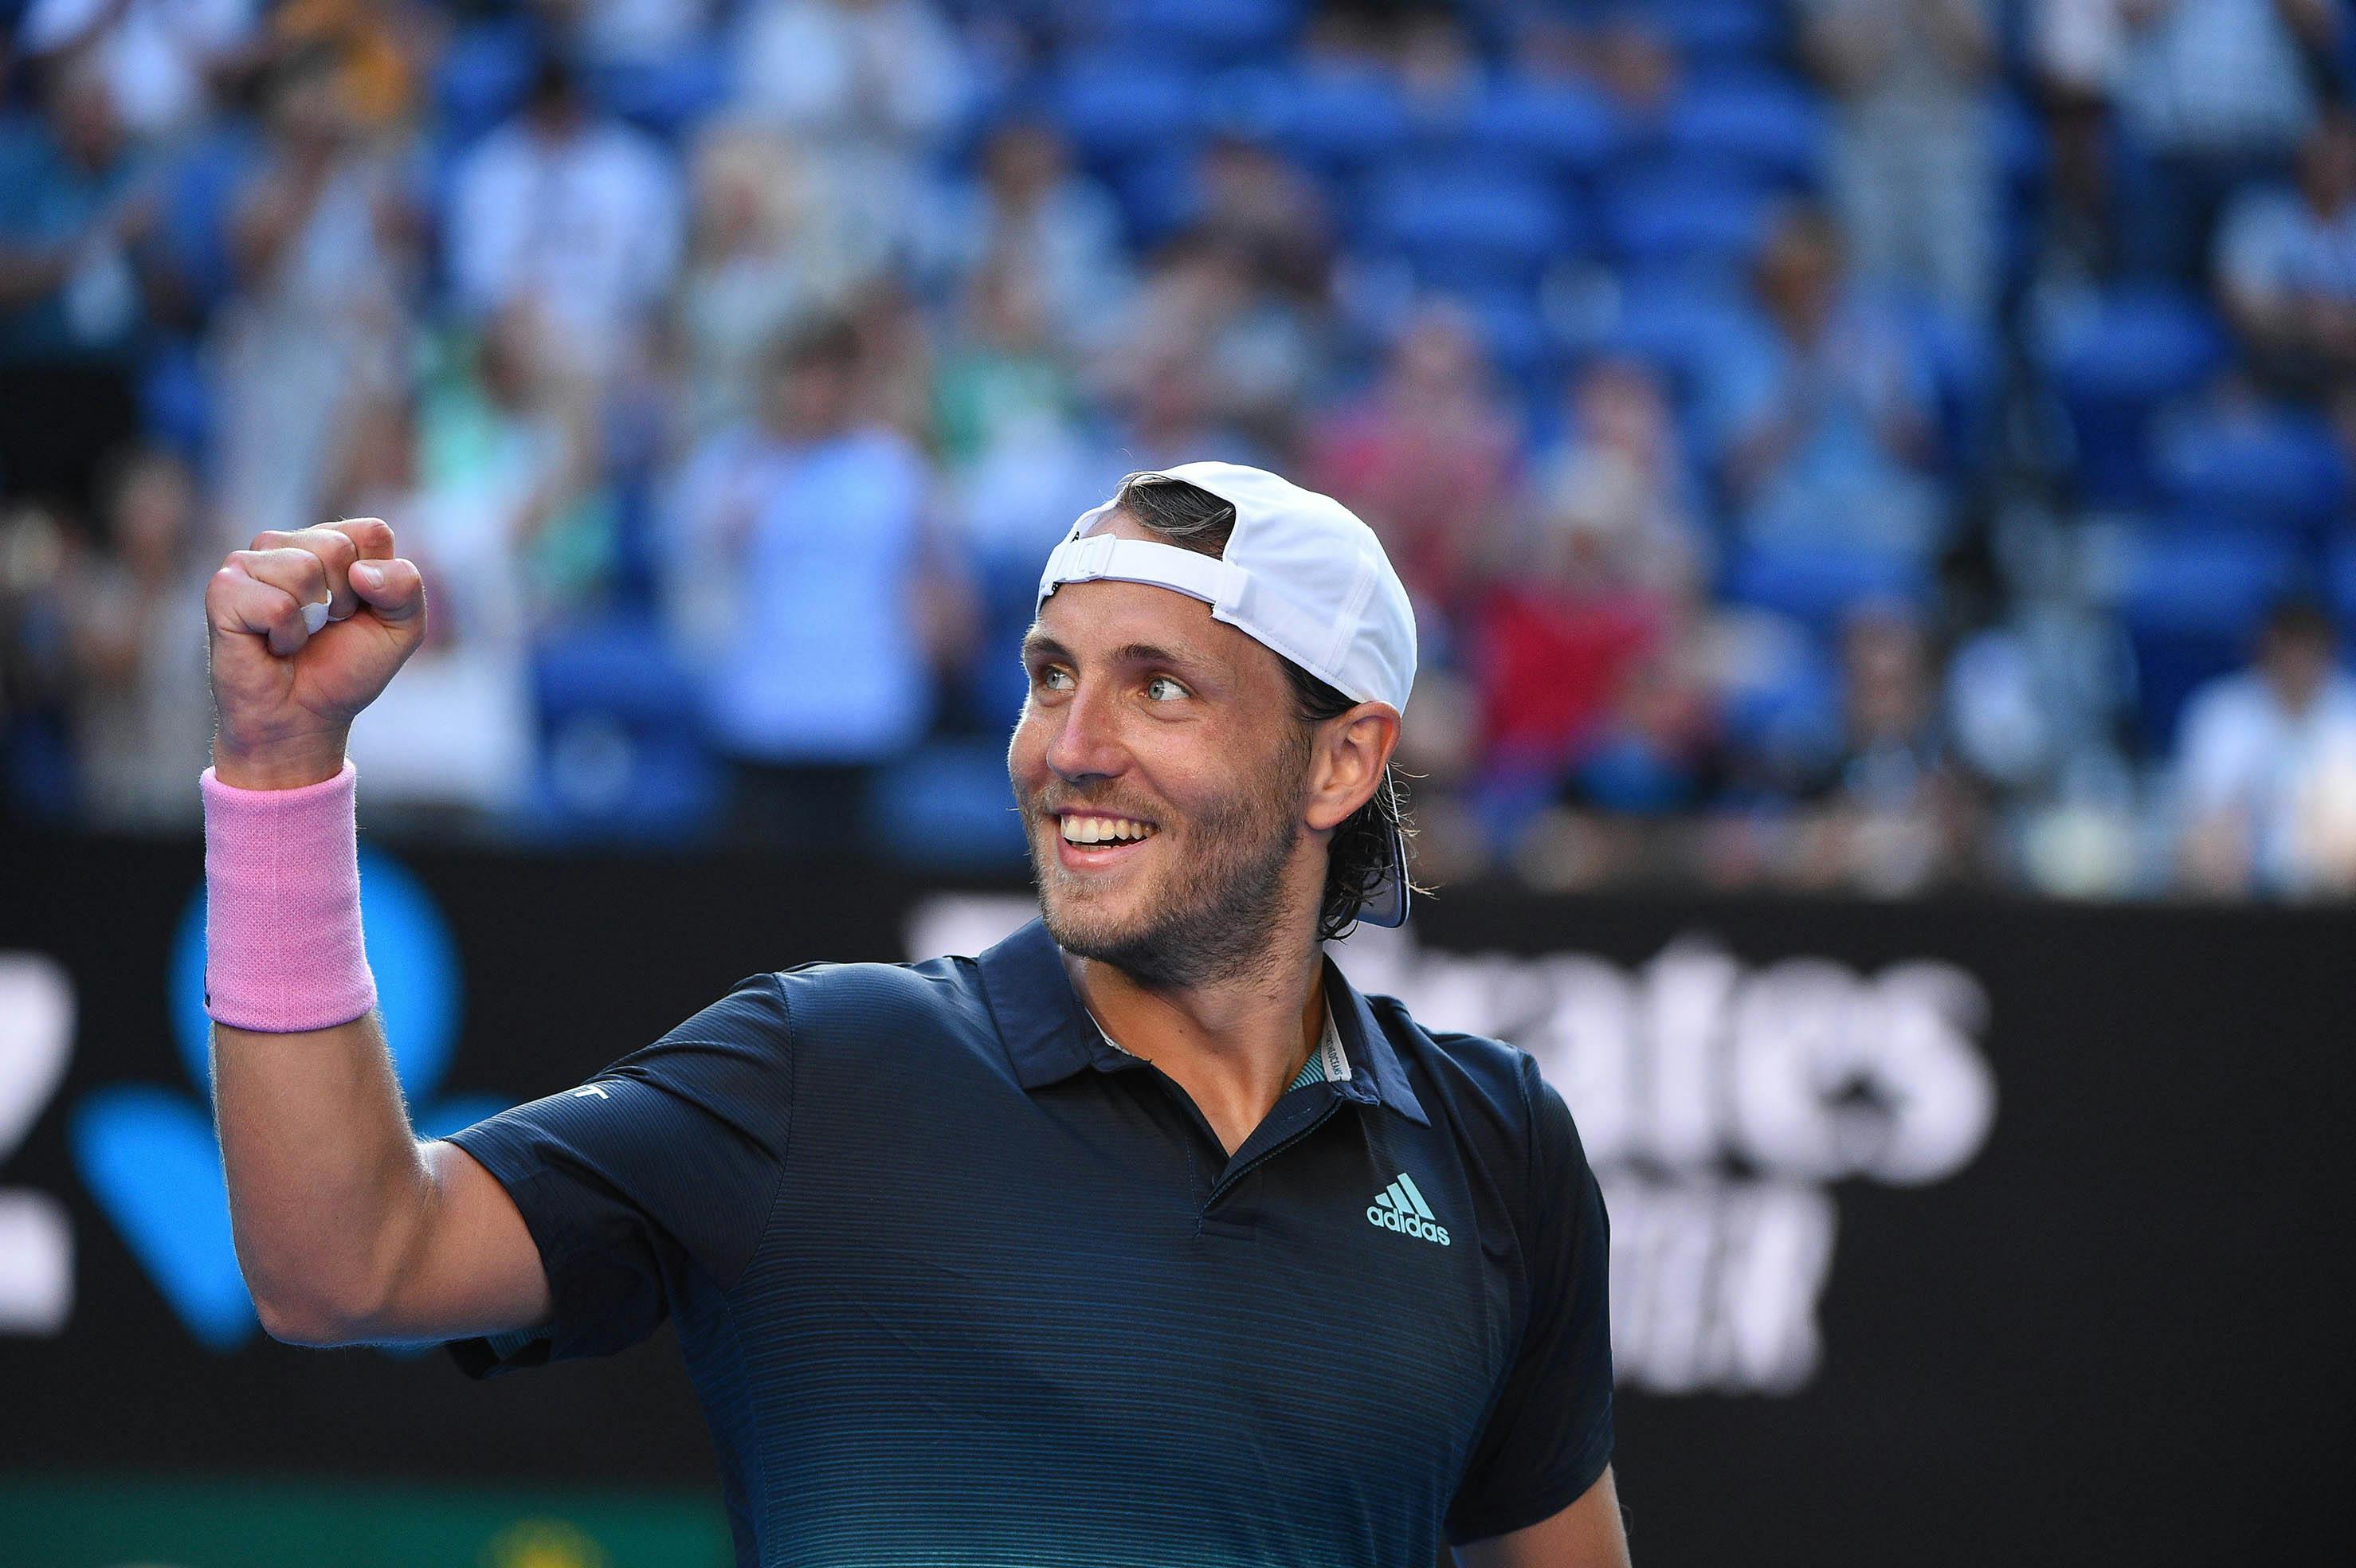 Lucas Pouille smiling and fistpumping after his victory in the quarters of the 2019 Australian Open